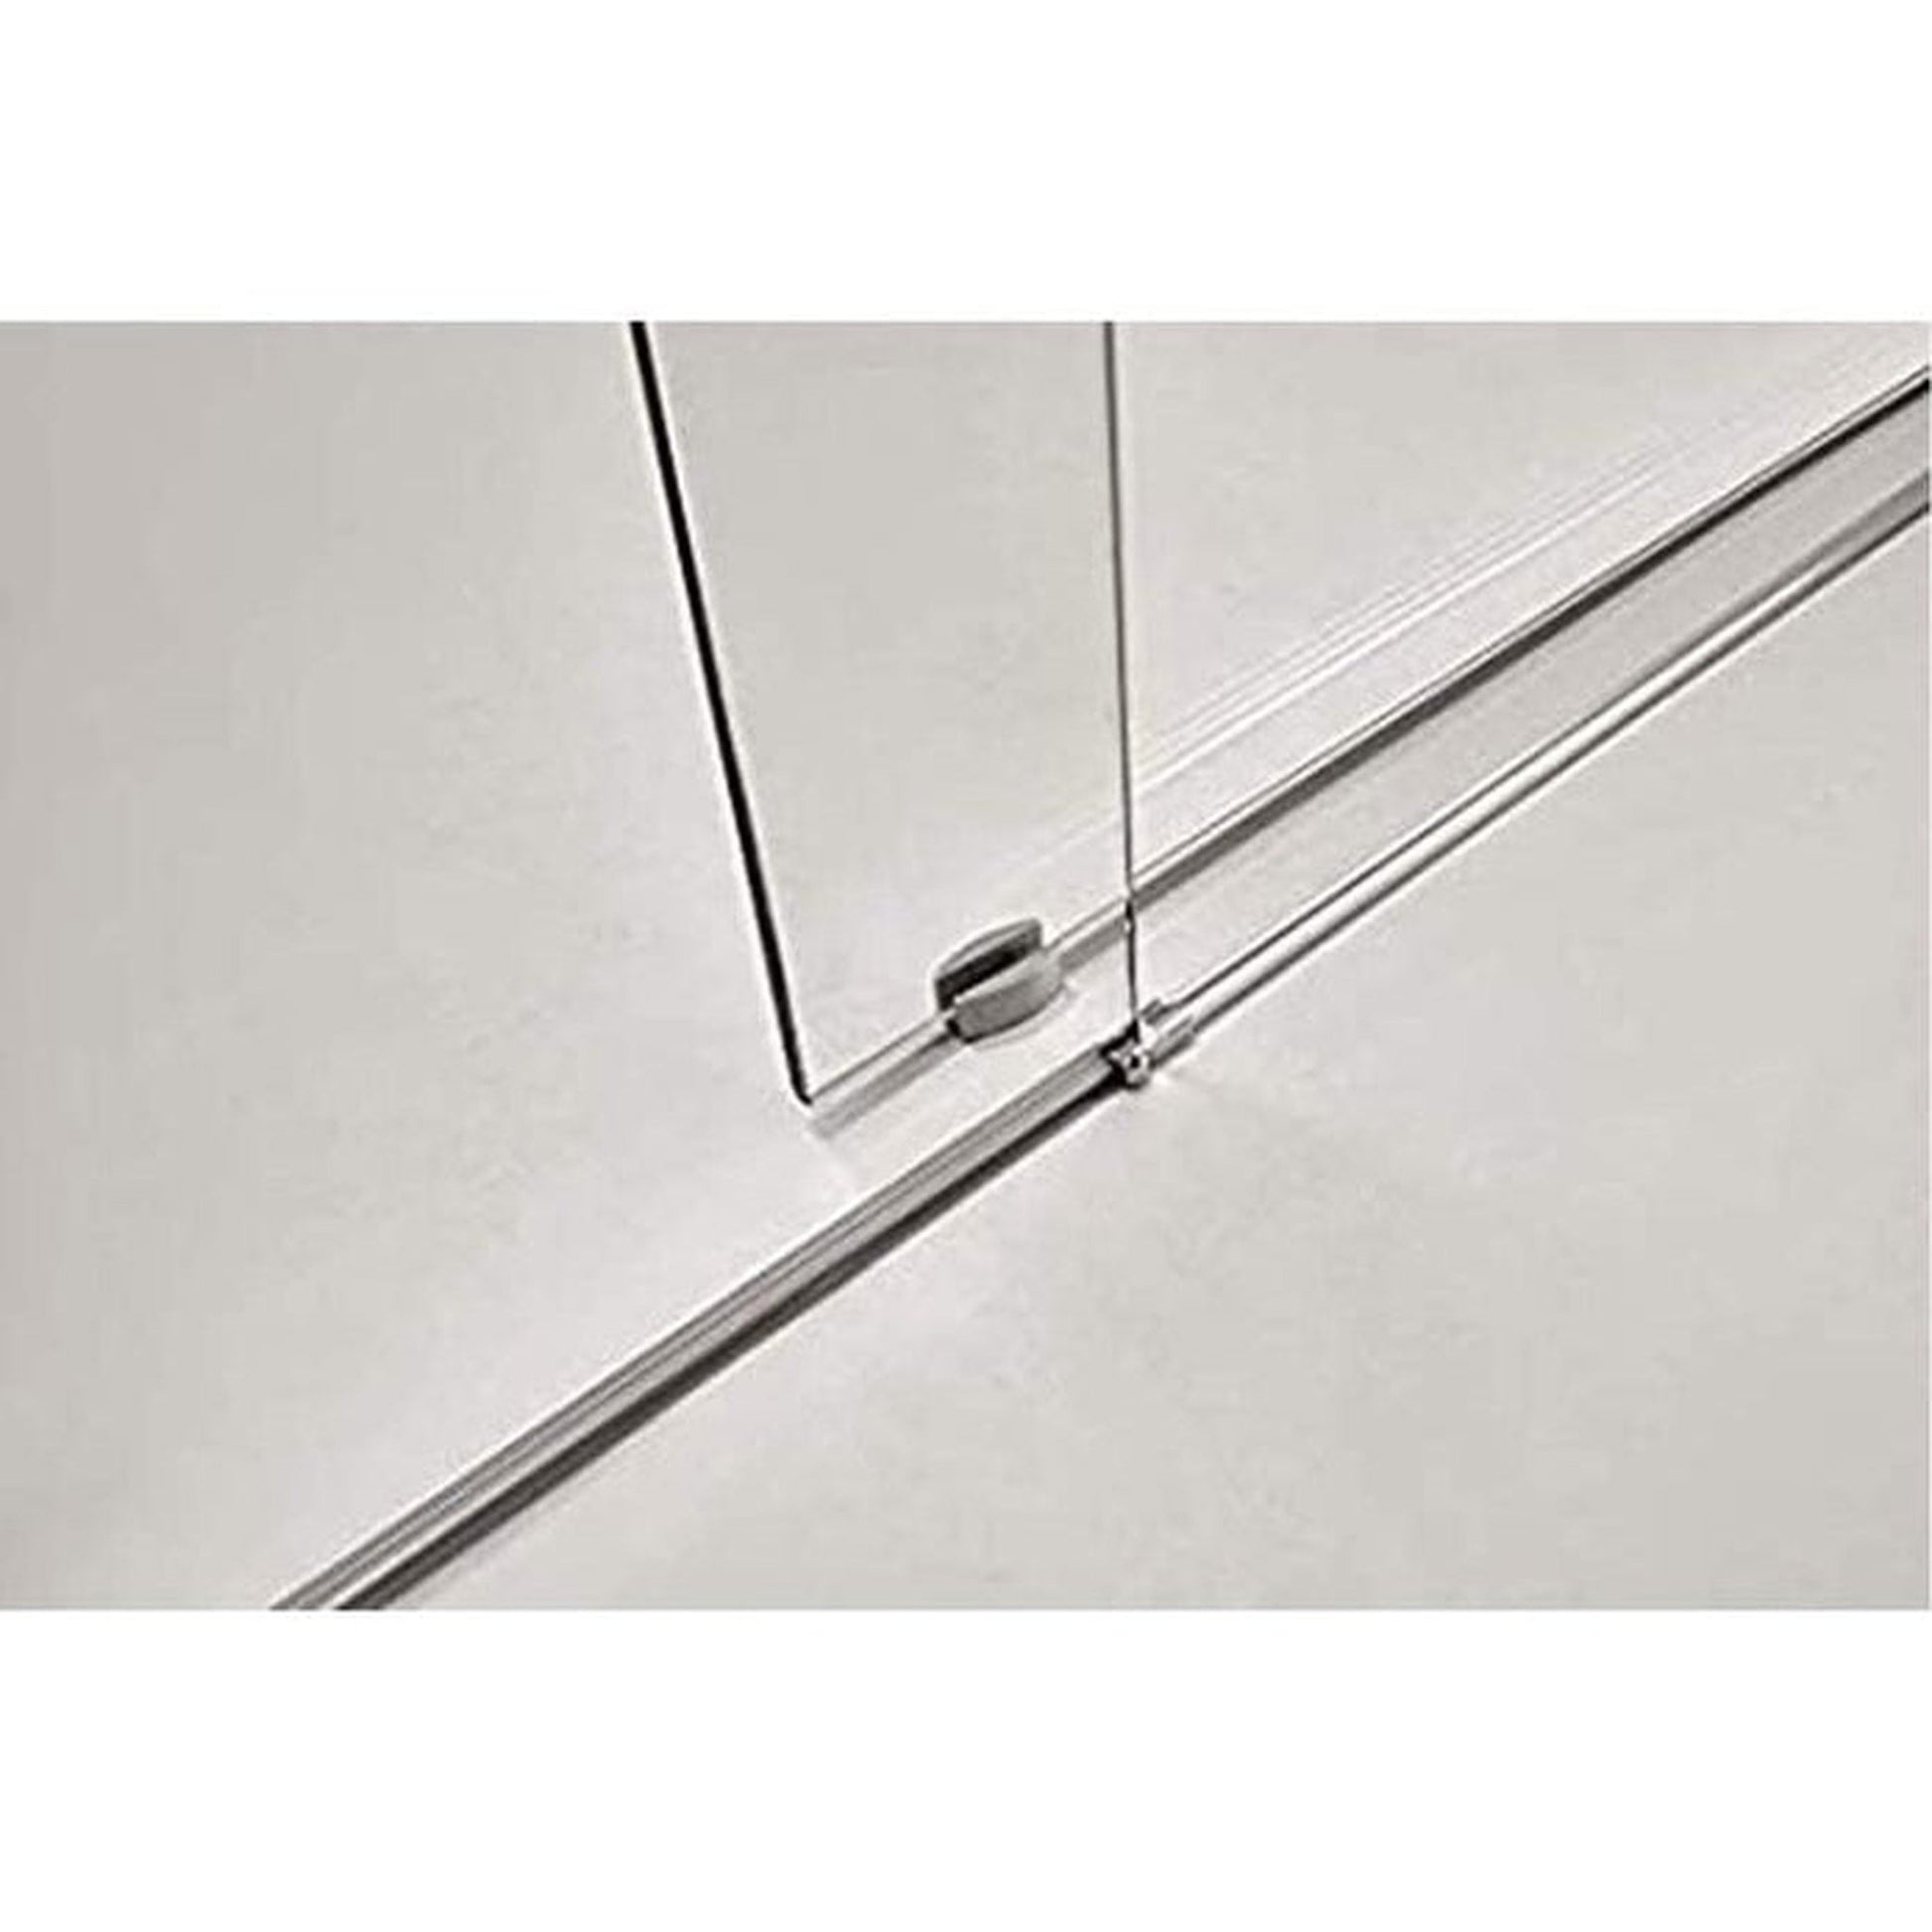 Vanity Art 76" H x 60" W Clear Tempered Glass Single Sliding Frameless Shower Door With Polished Chrome Hardware